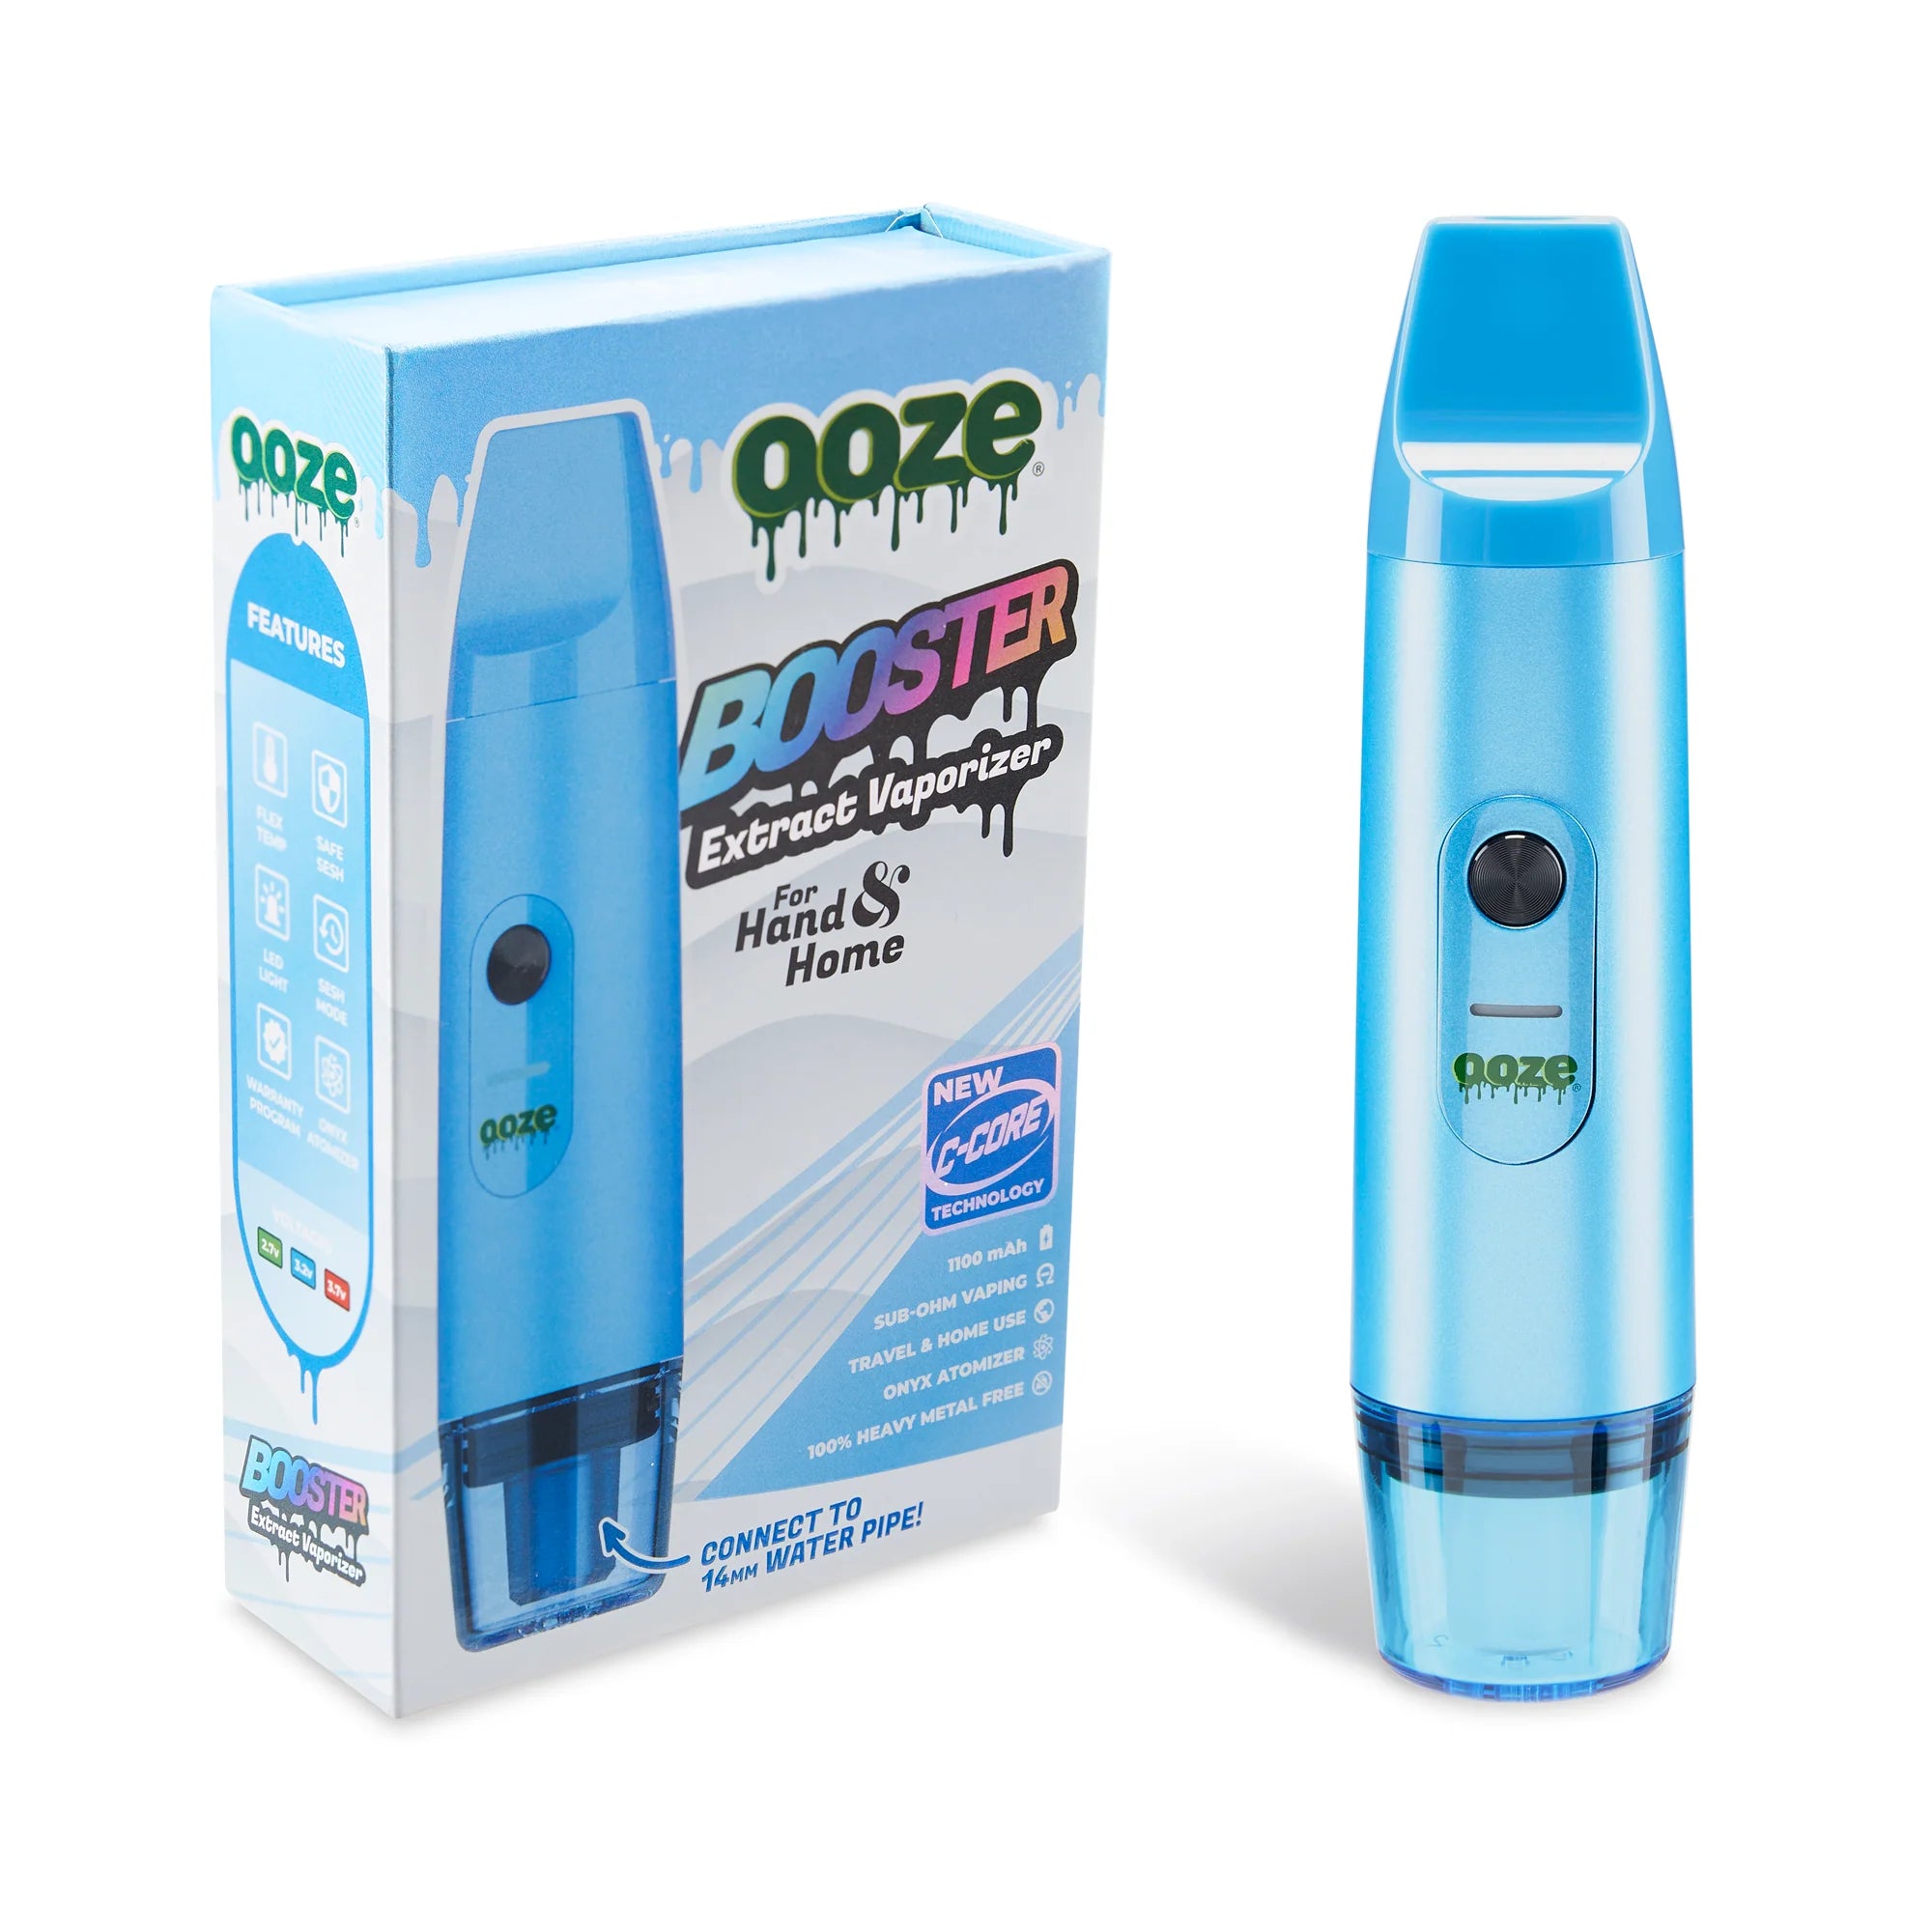 Booster Extract Vaporizer – C-Core 1100 MAh by Ooze